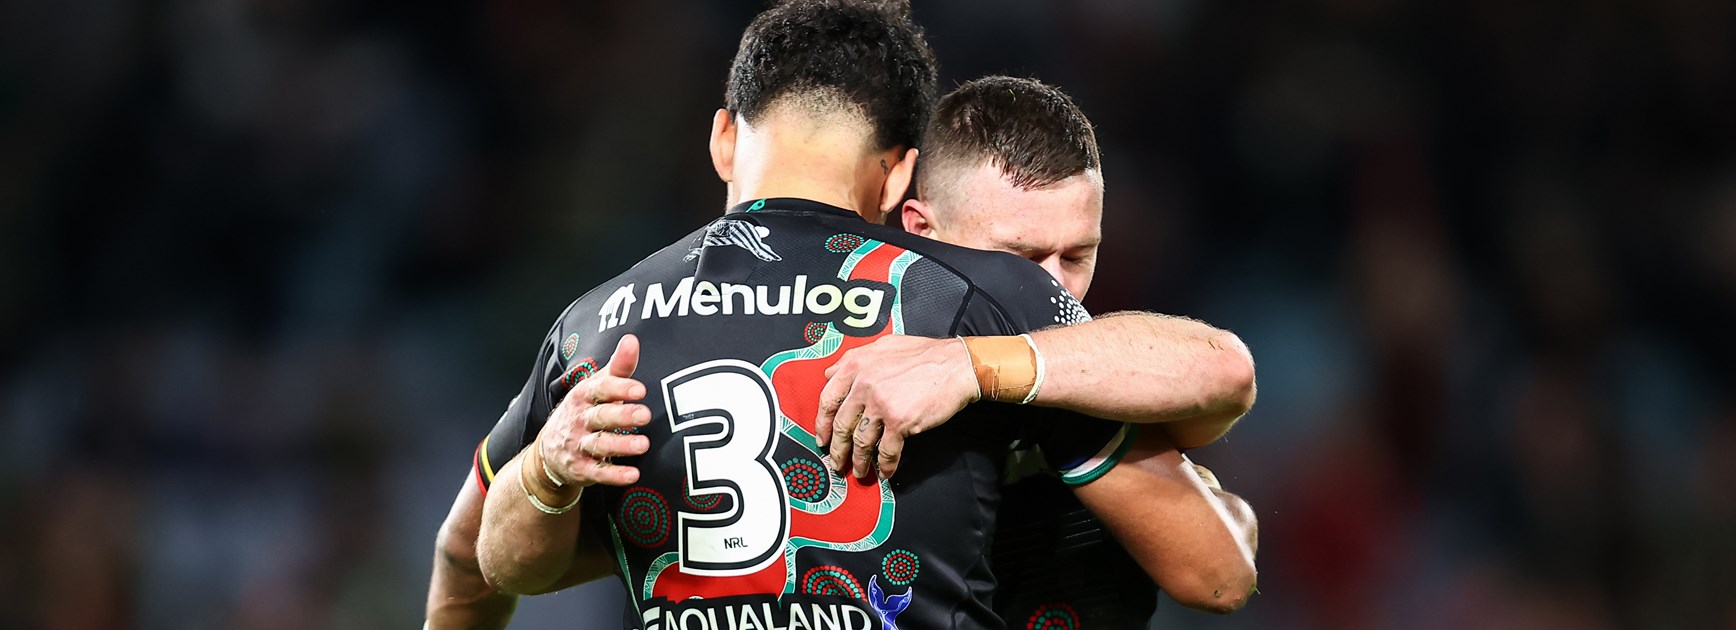 'It's not tolerated': Souths stars urge police action over Paulo threats